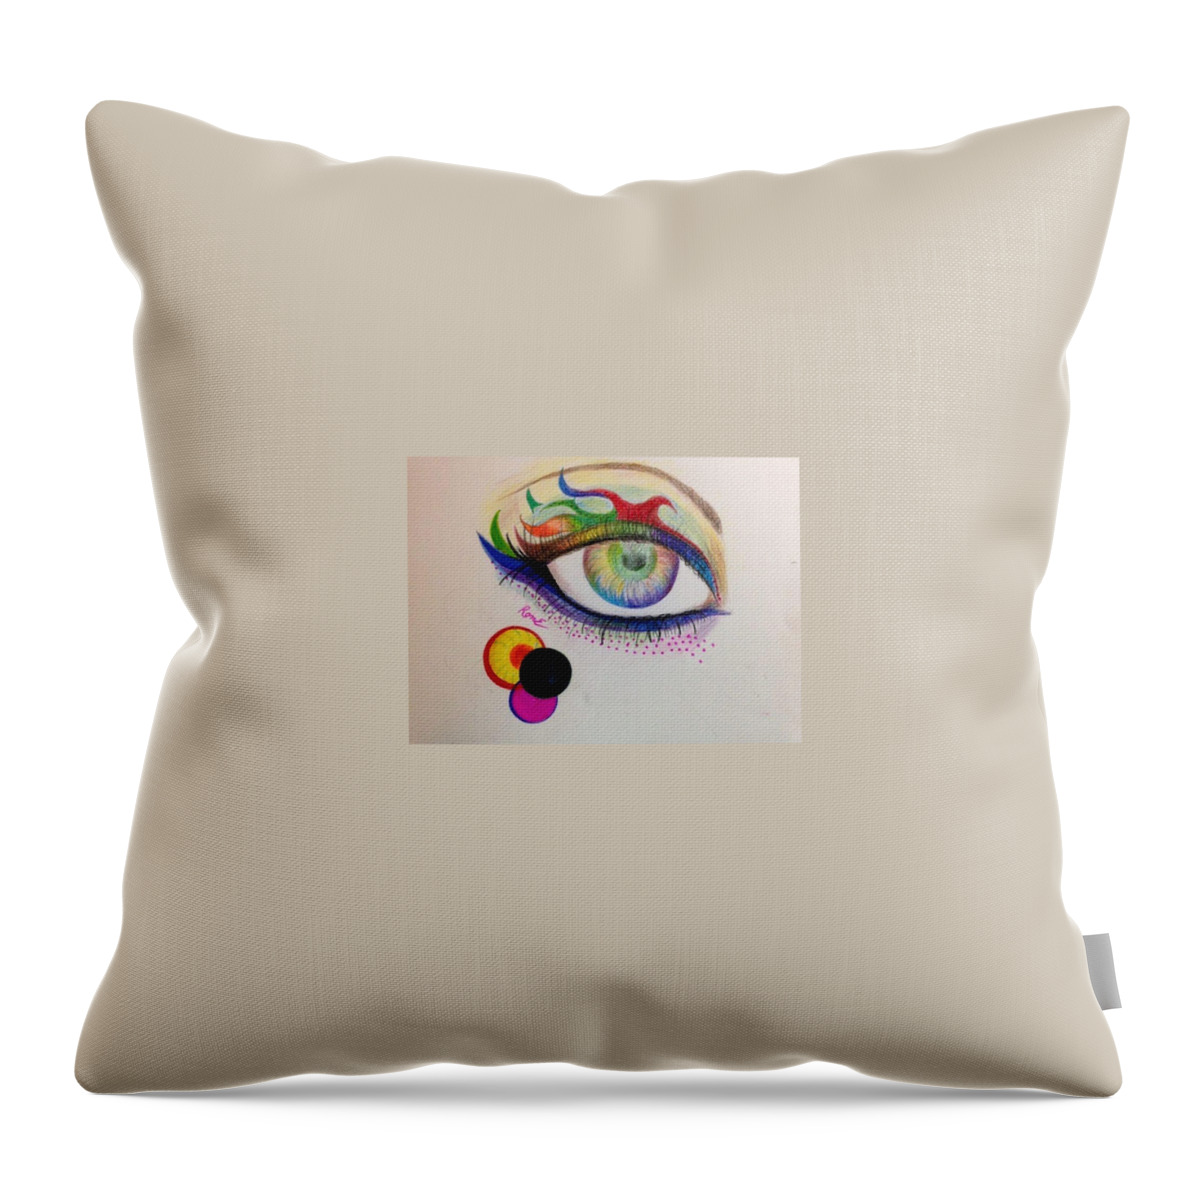    Pop Art Throw Pillow featuring the mixed media All Seeing by Ronnie Egerton